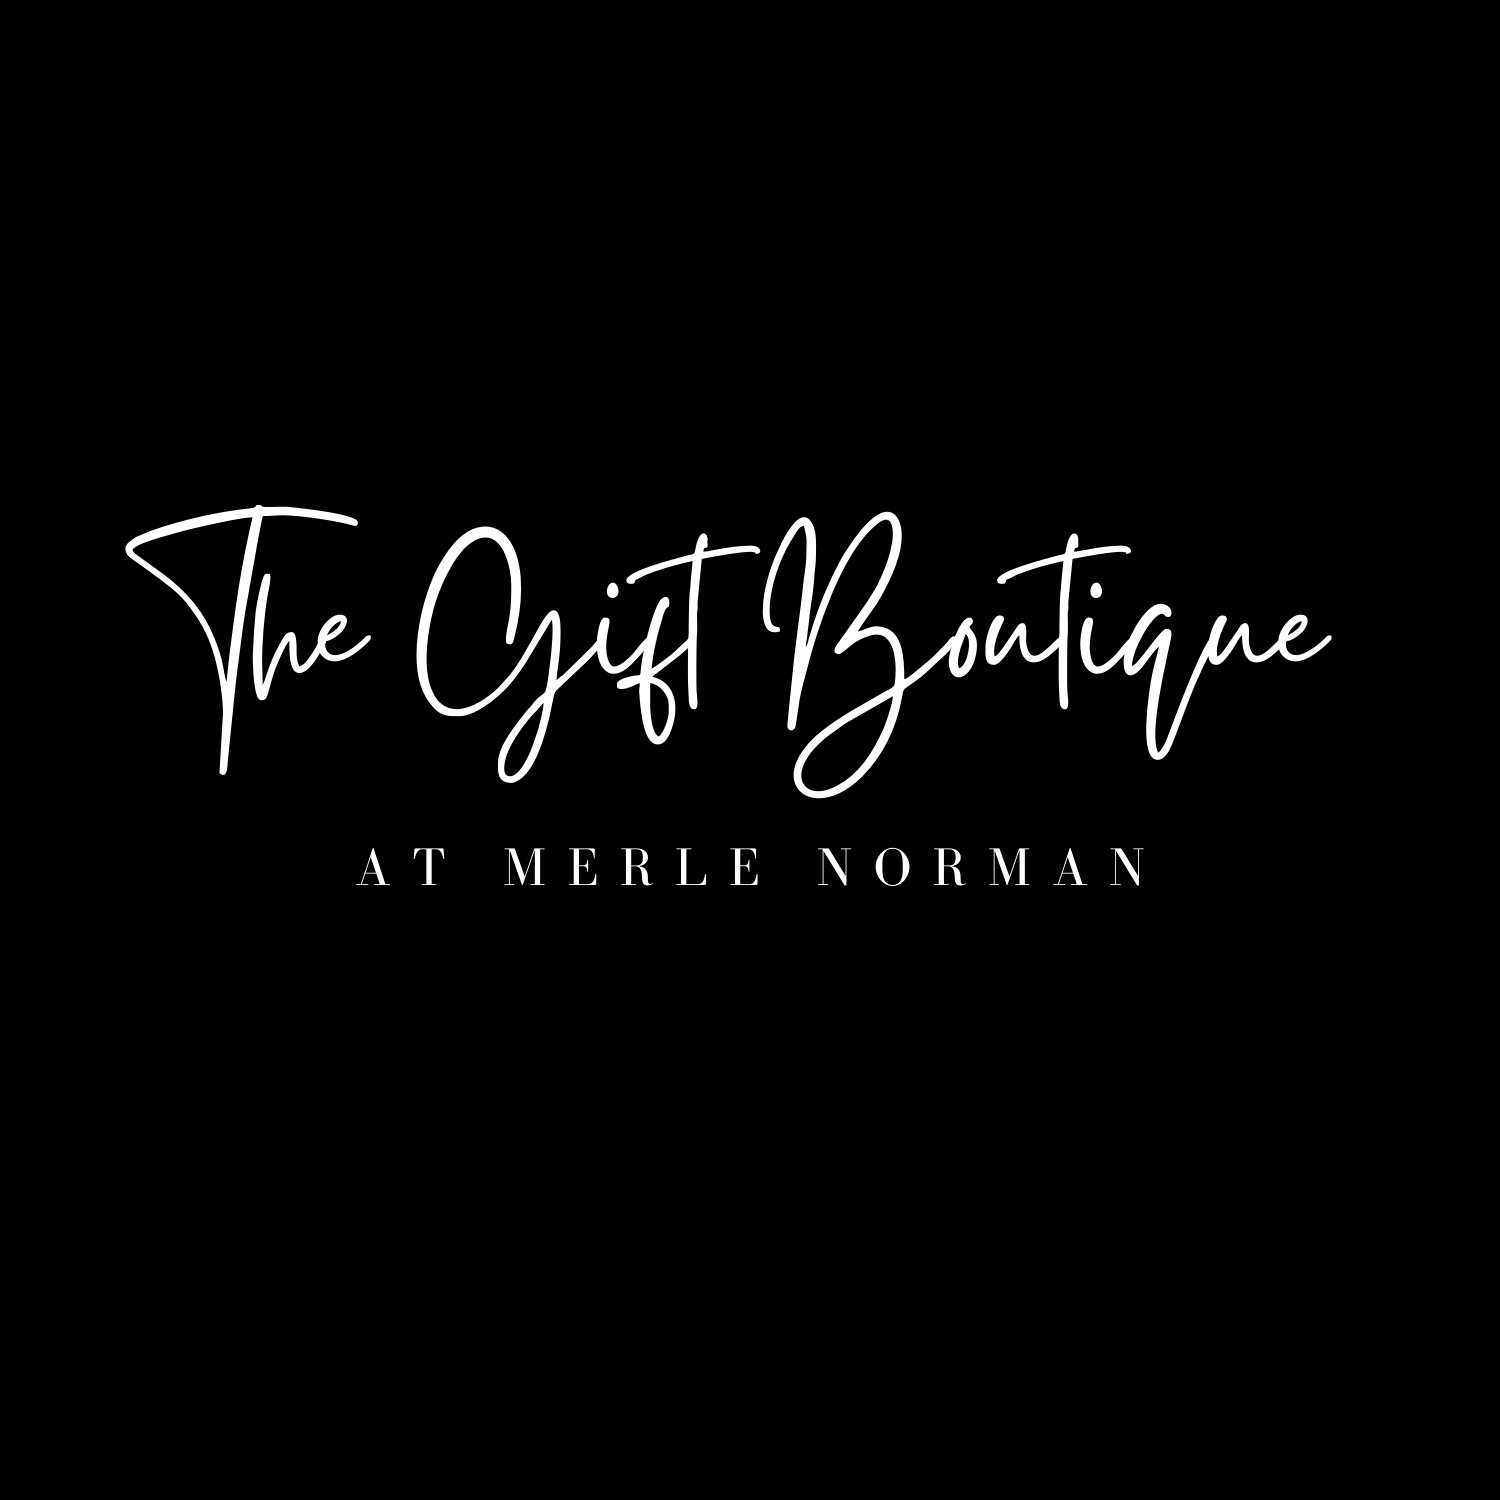 The Gift Boutique at Merle Norman Logo